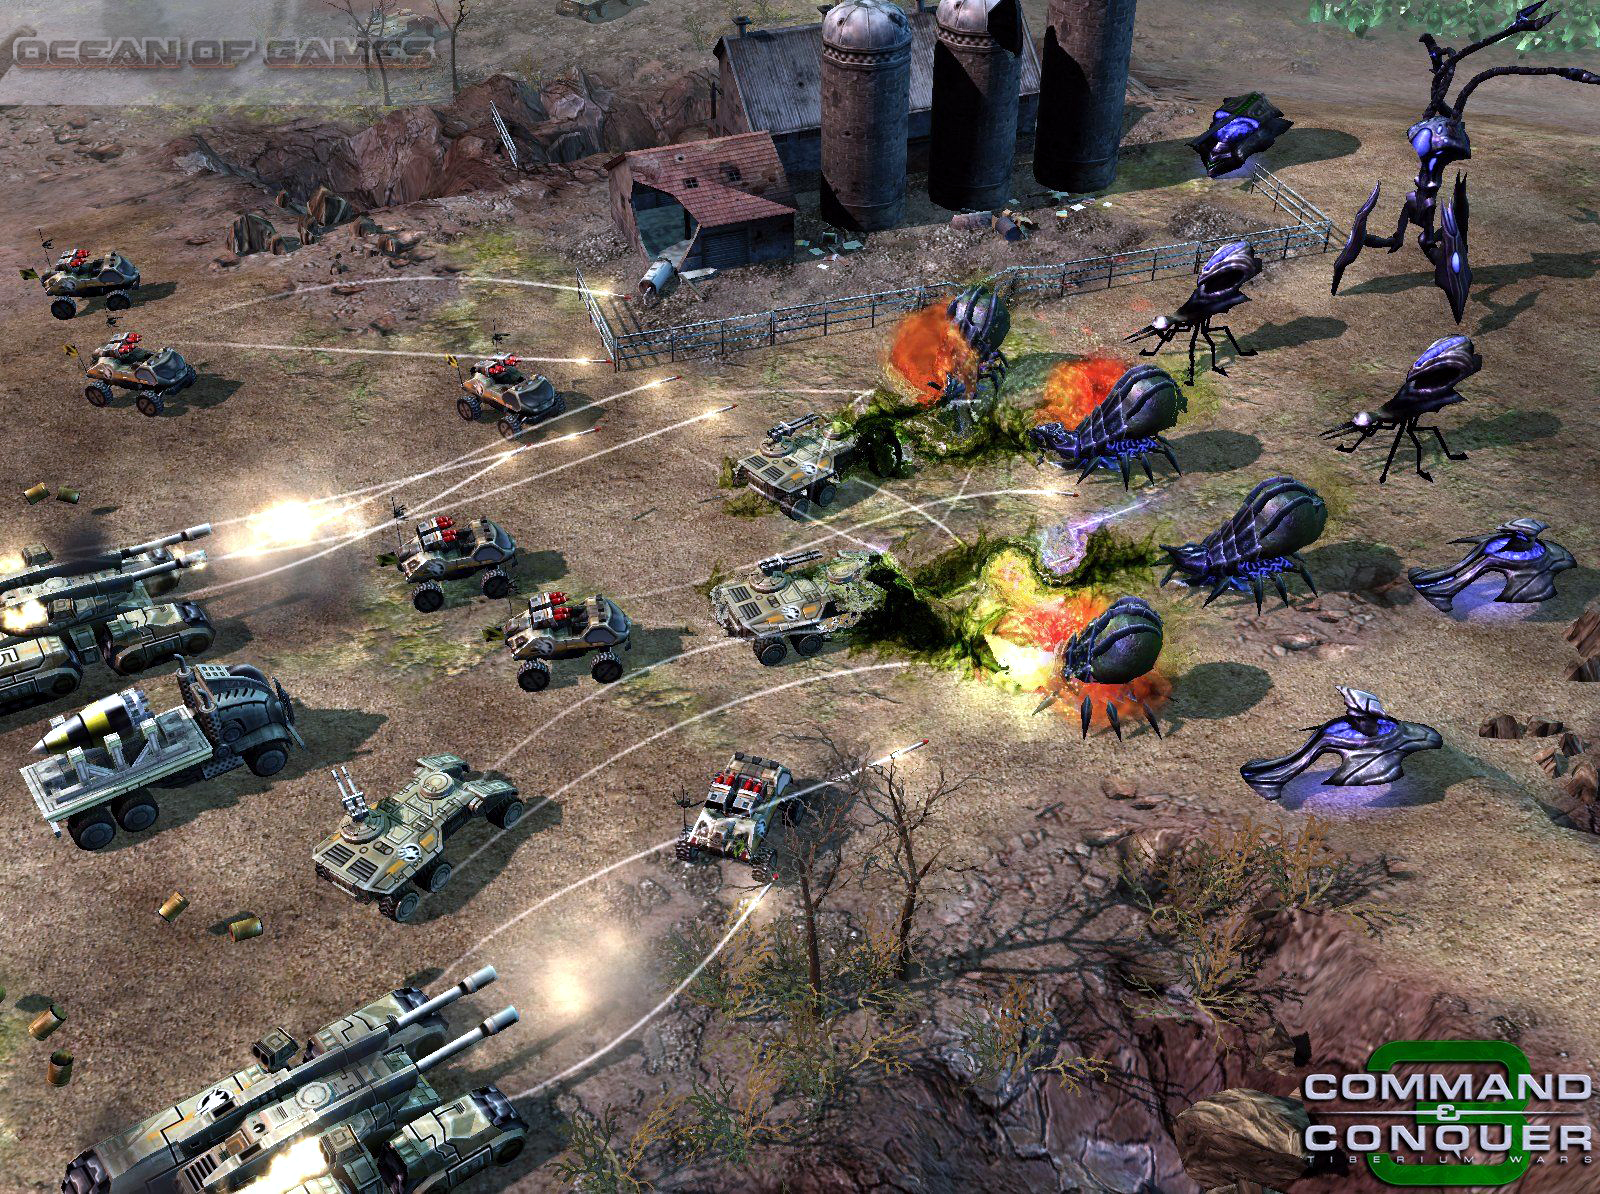 command and conquer red alert 2 free download kickass